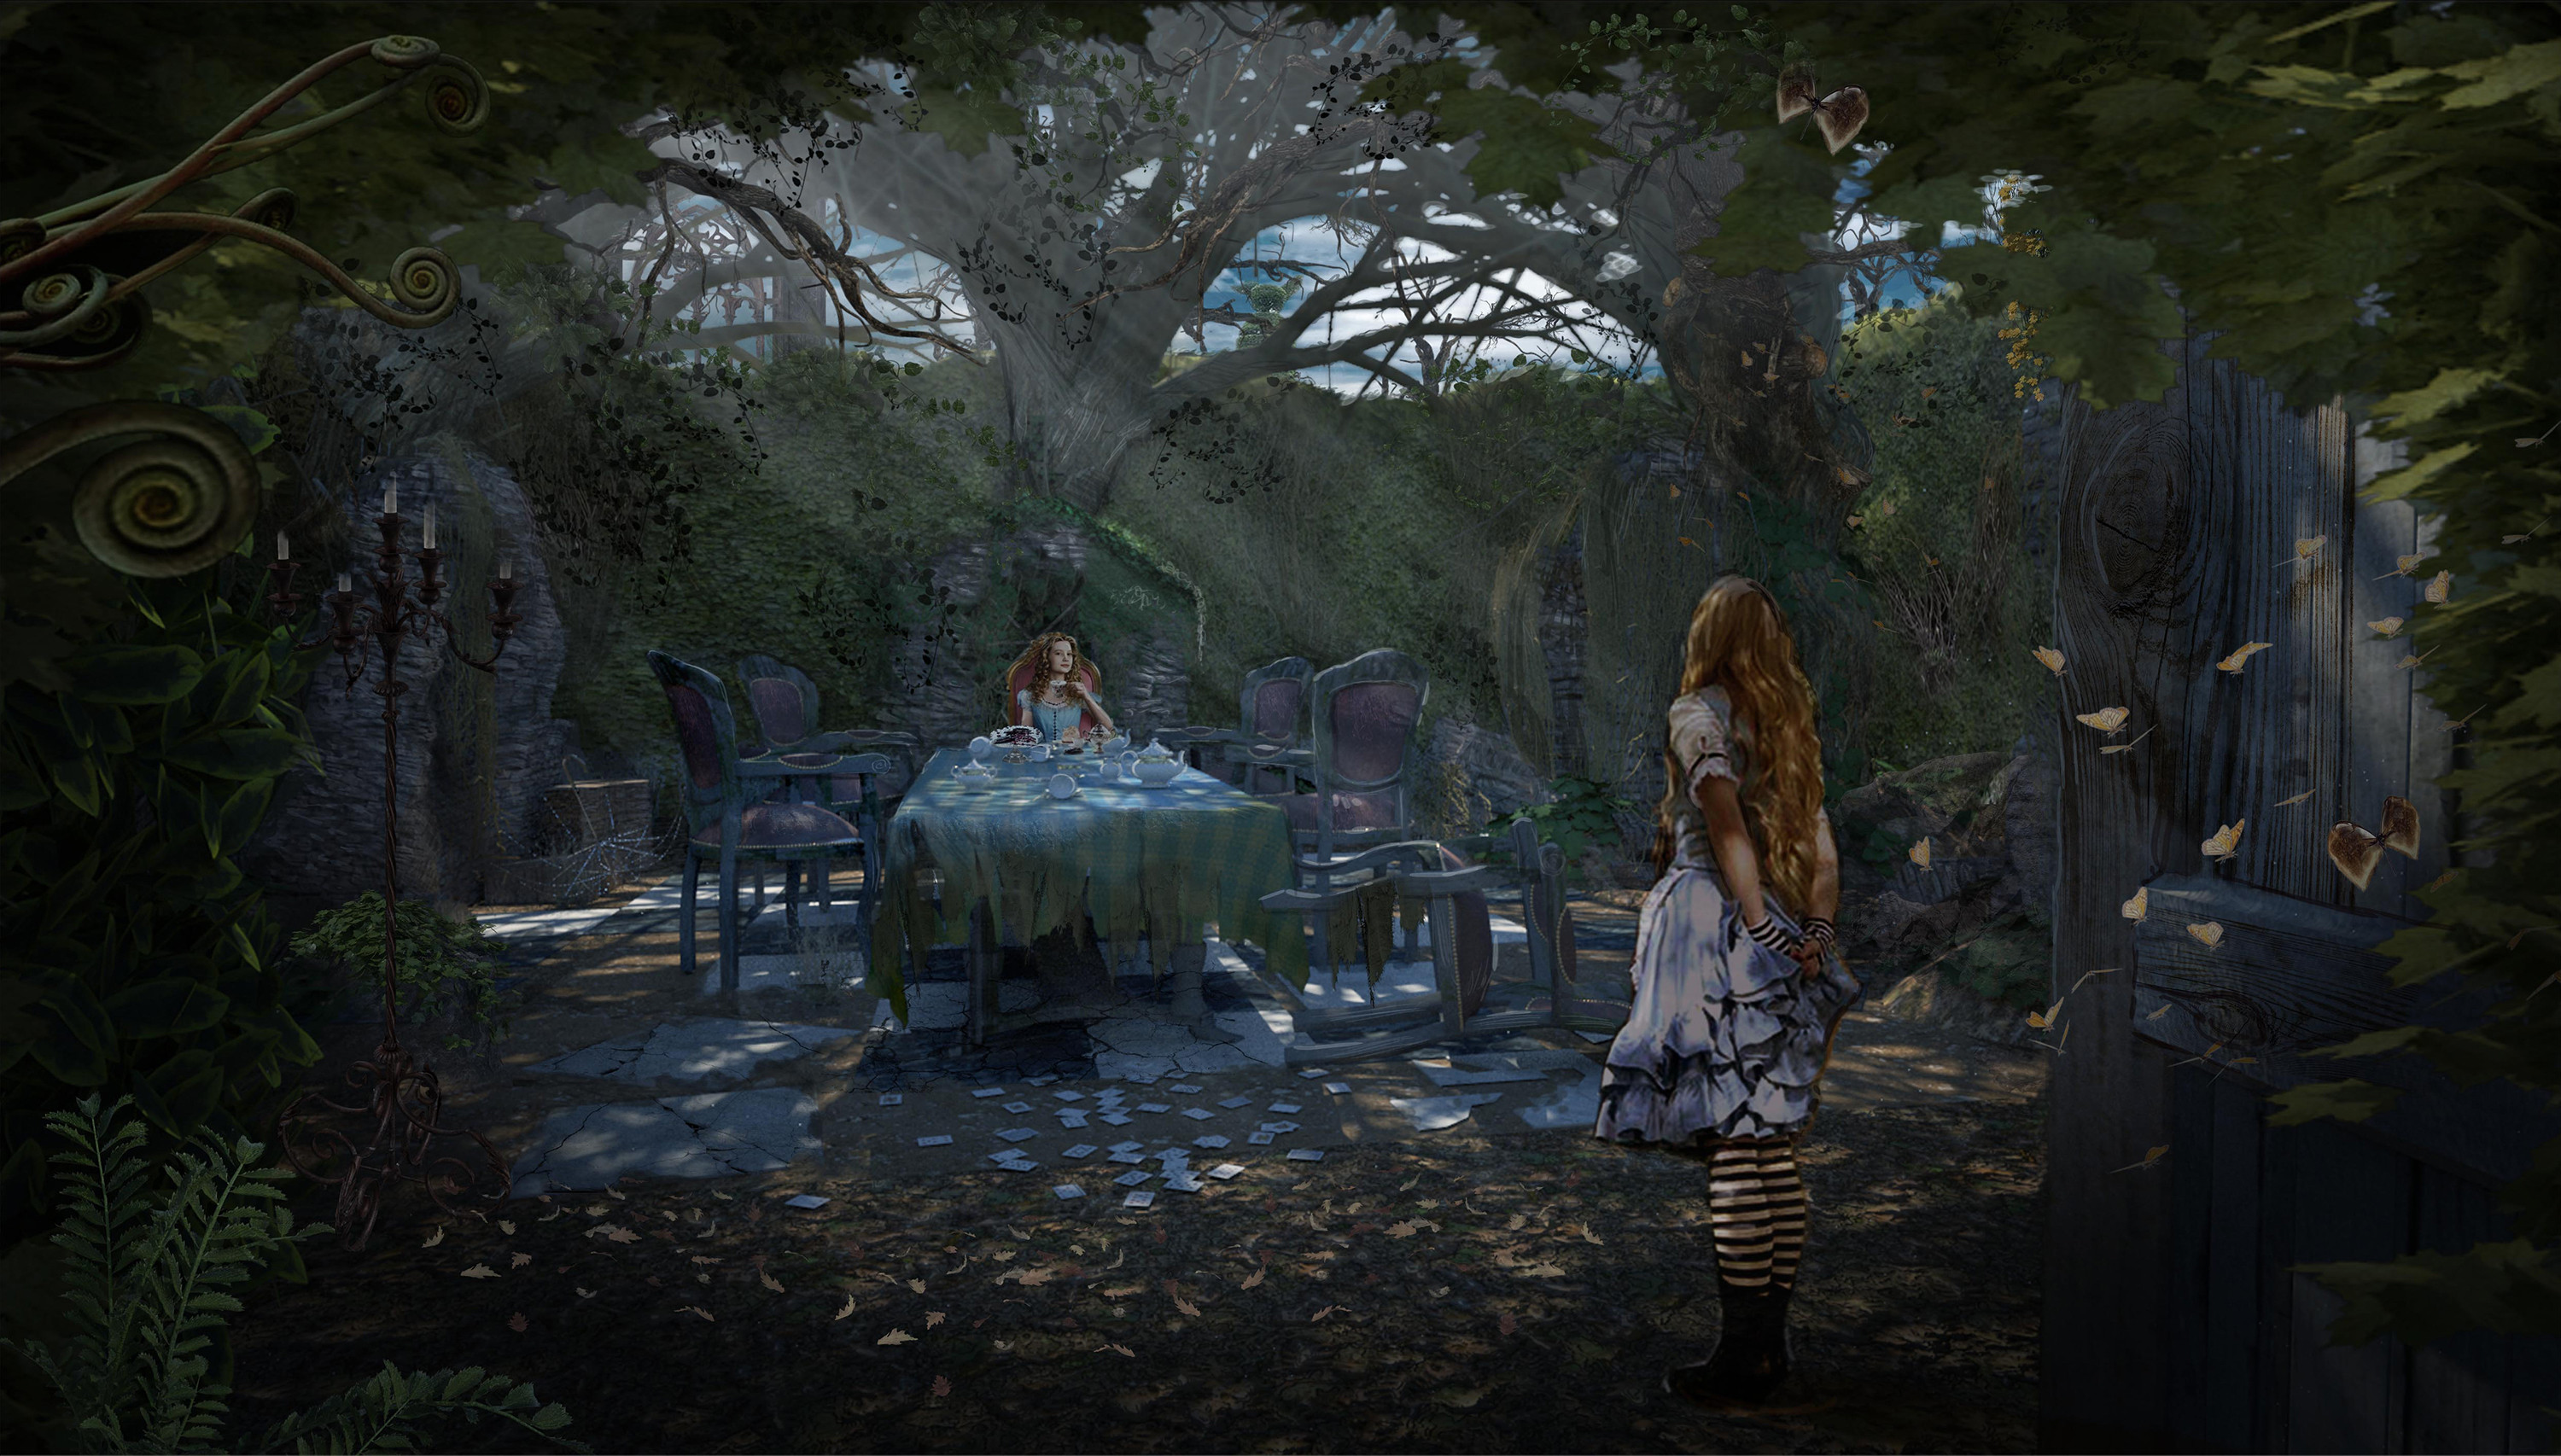 Wonderland Tea Party Concept for  ABC's Once Upon a Time Season 7 - 3D Geo / Rendering Chad Harms